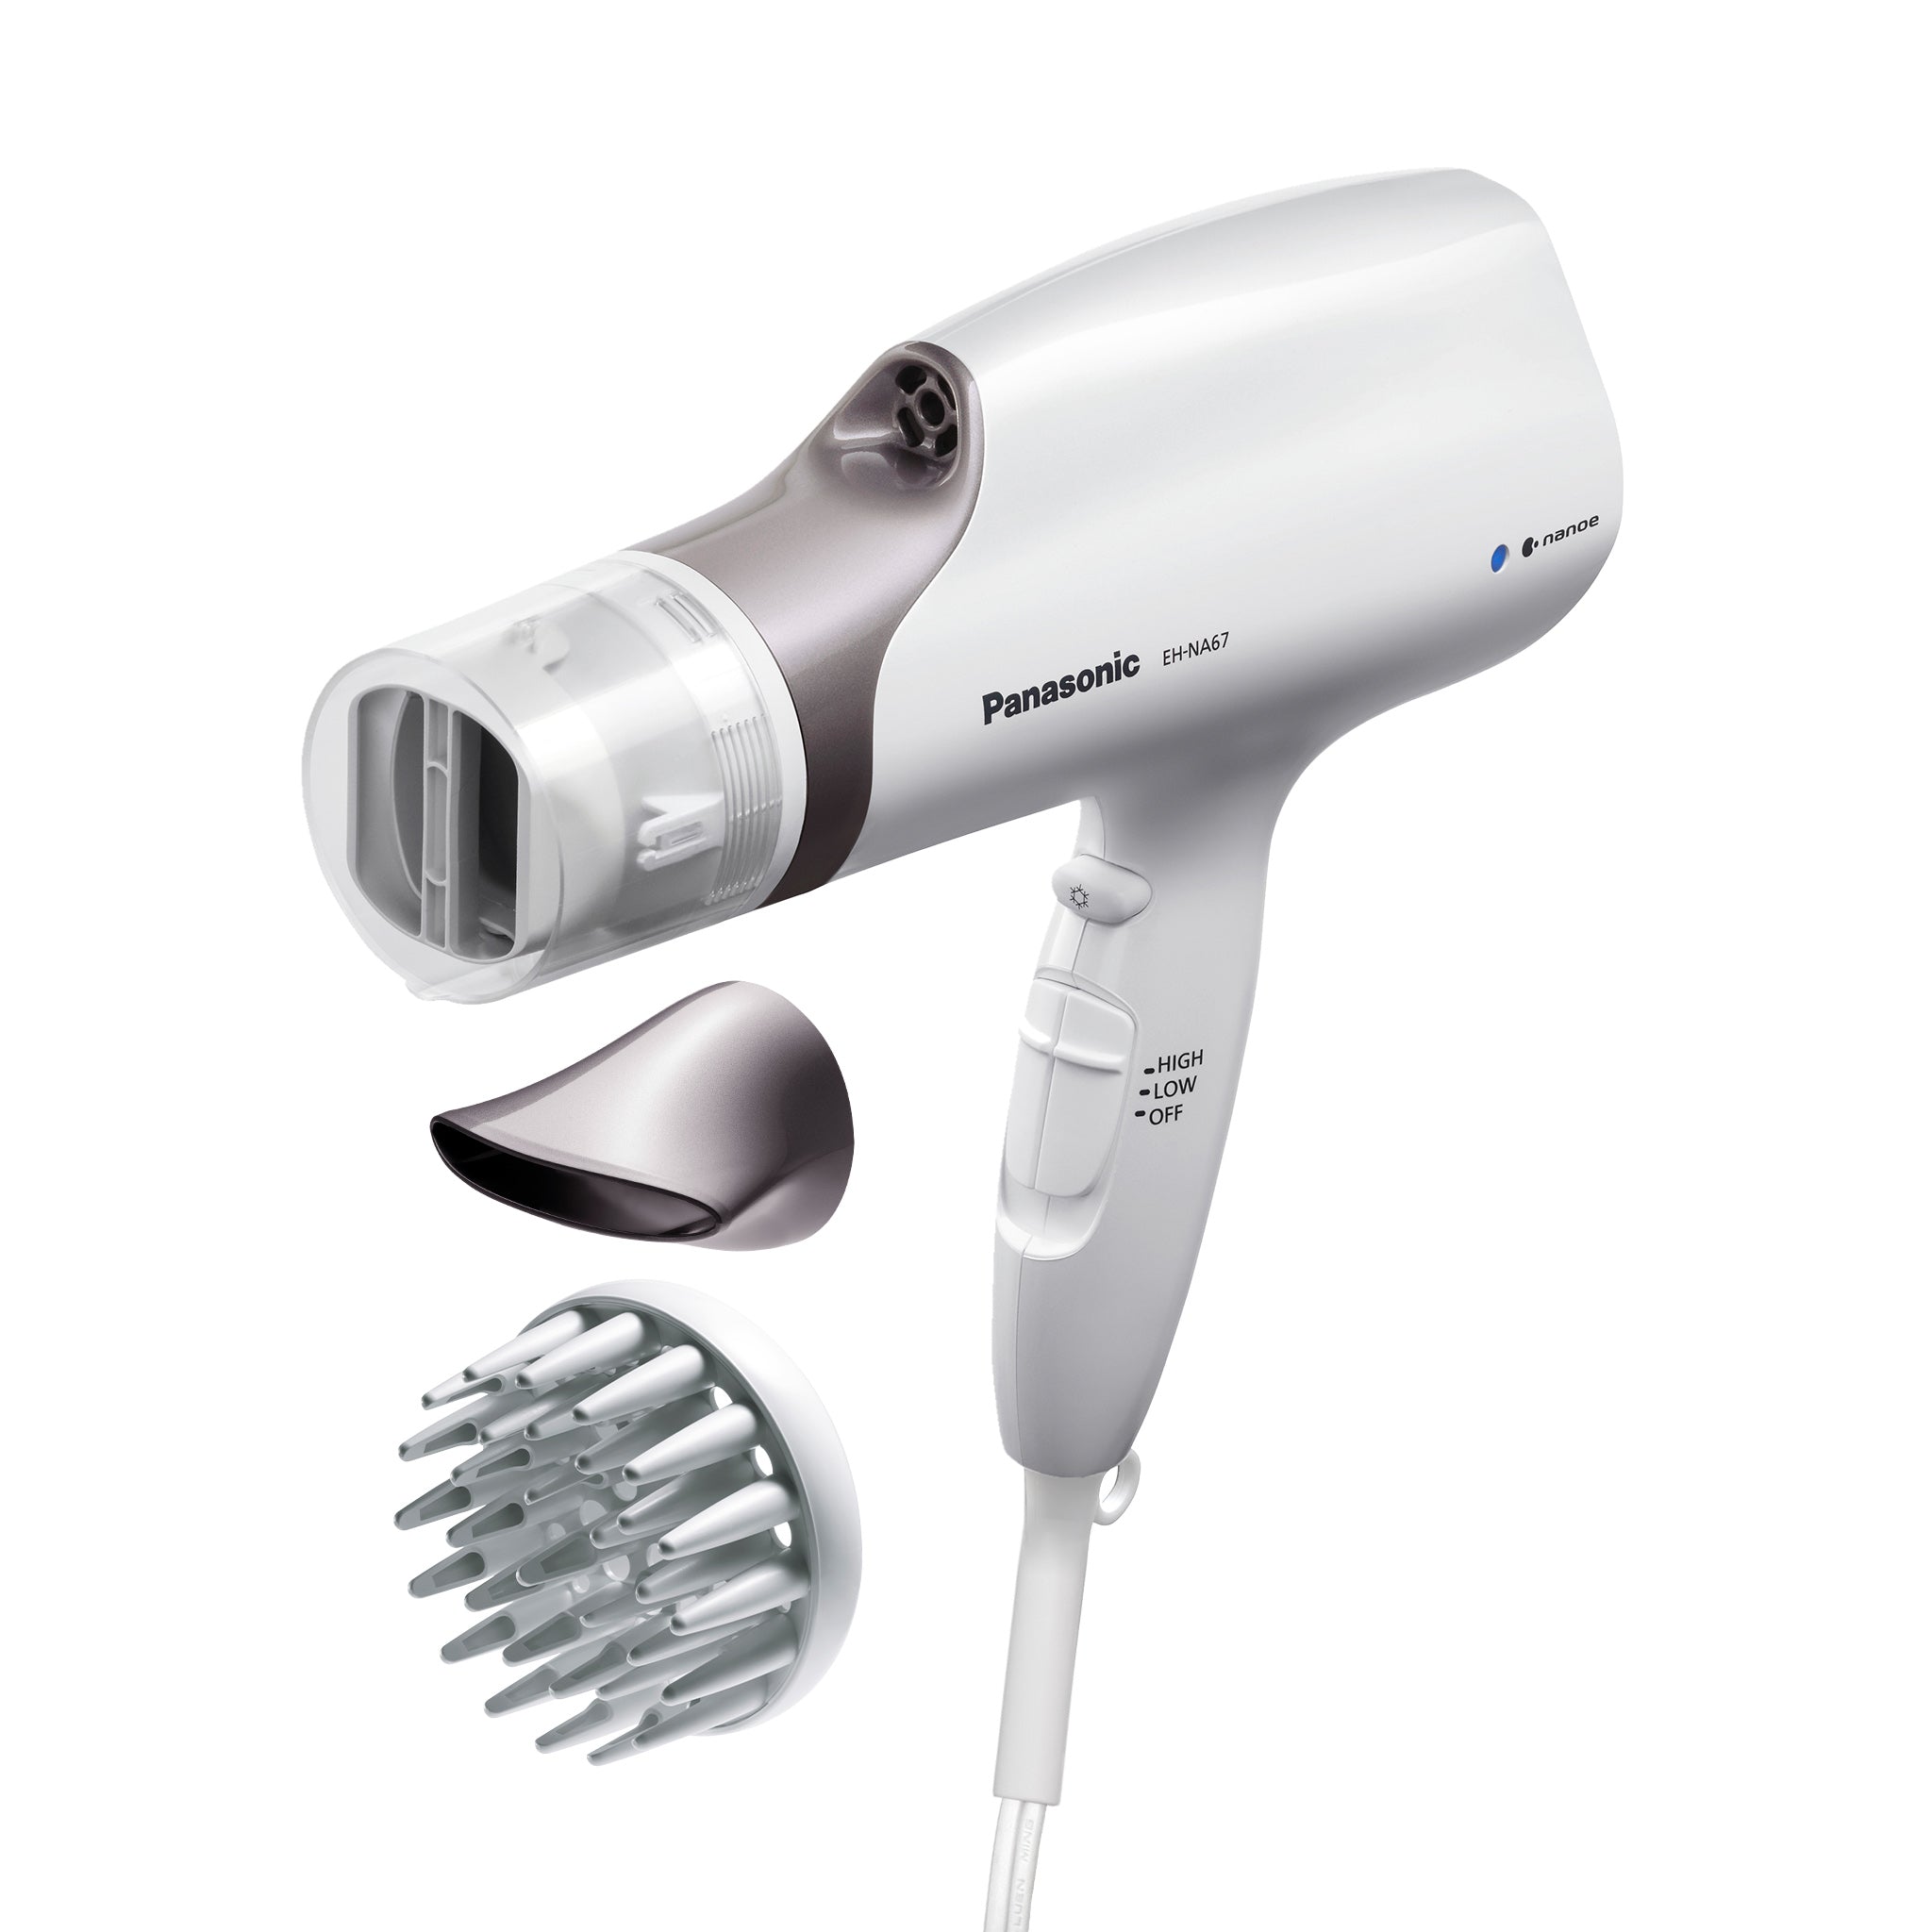 Panasonic nanoe™ Hair Dryer with Attachments Nozzle including Oscillating 3 Quick-Dry Styling